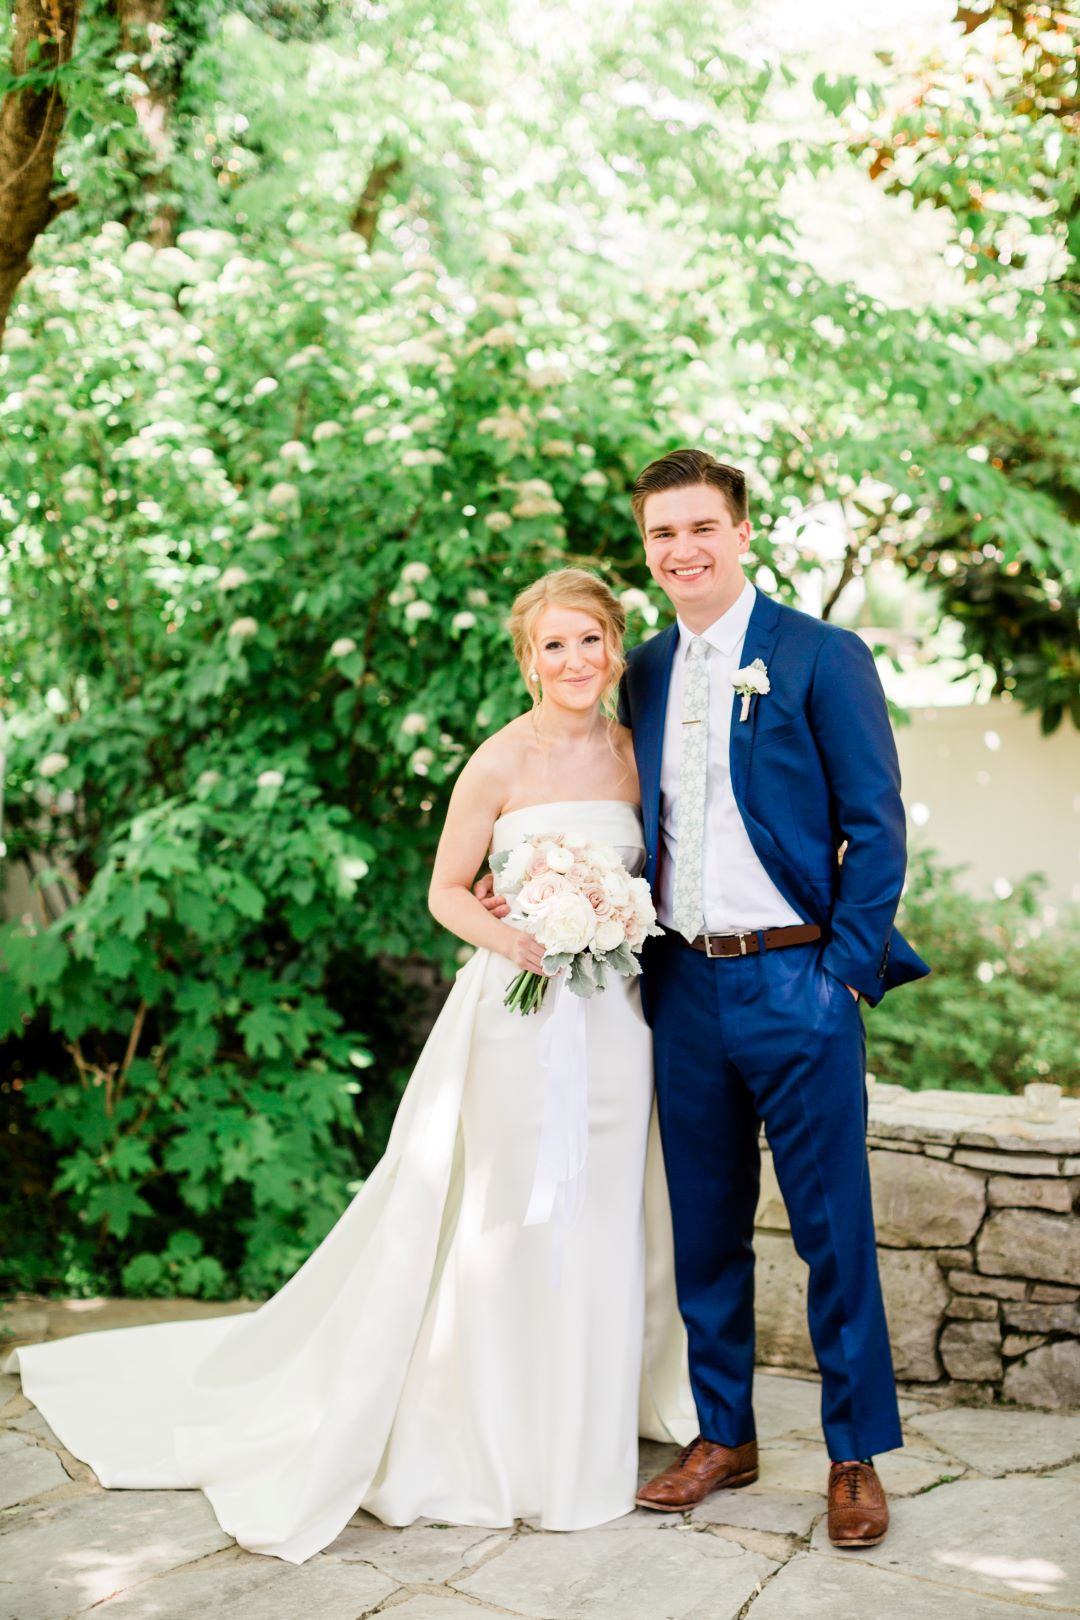 CJ's Off The Square | Bride and groom posing for portraits in the garden of the wedding venue